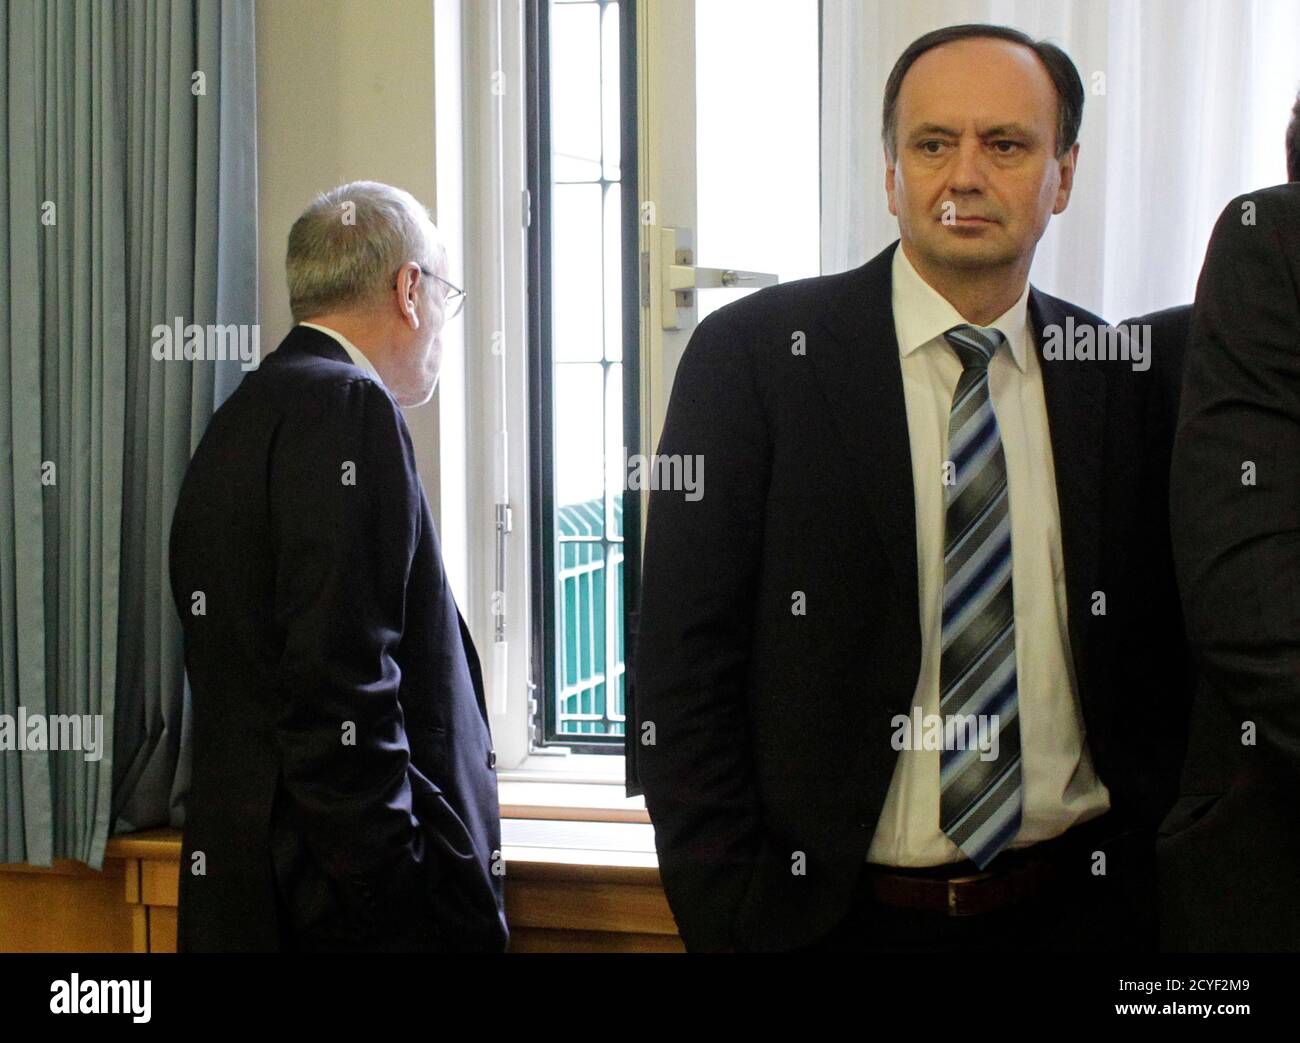 Former Telekom Austria manager Rudolf Fischer (L) and ex-wholesale manager Josef Trimmel wait for their share manipulation trial at a court in Vienna February 27, 2013. Three former Telekom Austria top managers, along with another former employee and a banker are charged with arranging the mass buying of Telekom Austria shares in 2004, causing a surge in the price that triggered a payout of 9 million euro ($12 million) for managers. REUTERS/Herwig Prammer  (AUSTRIA - Tags: BUSINESS CRIME LAW TELECOMS) Stock Photo